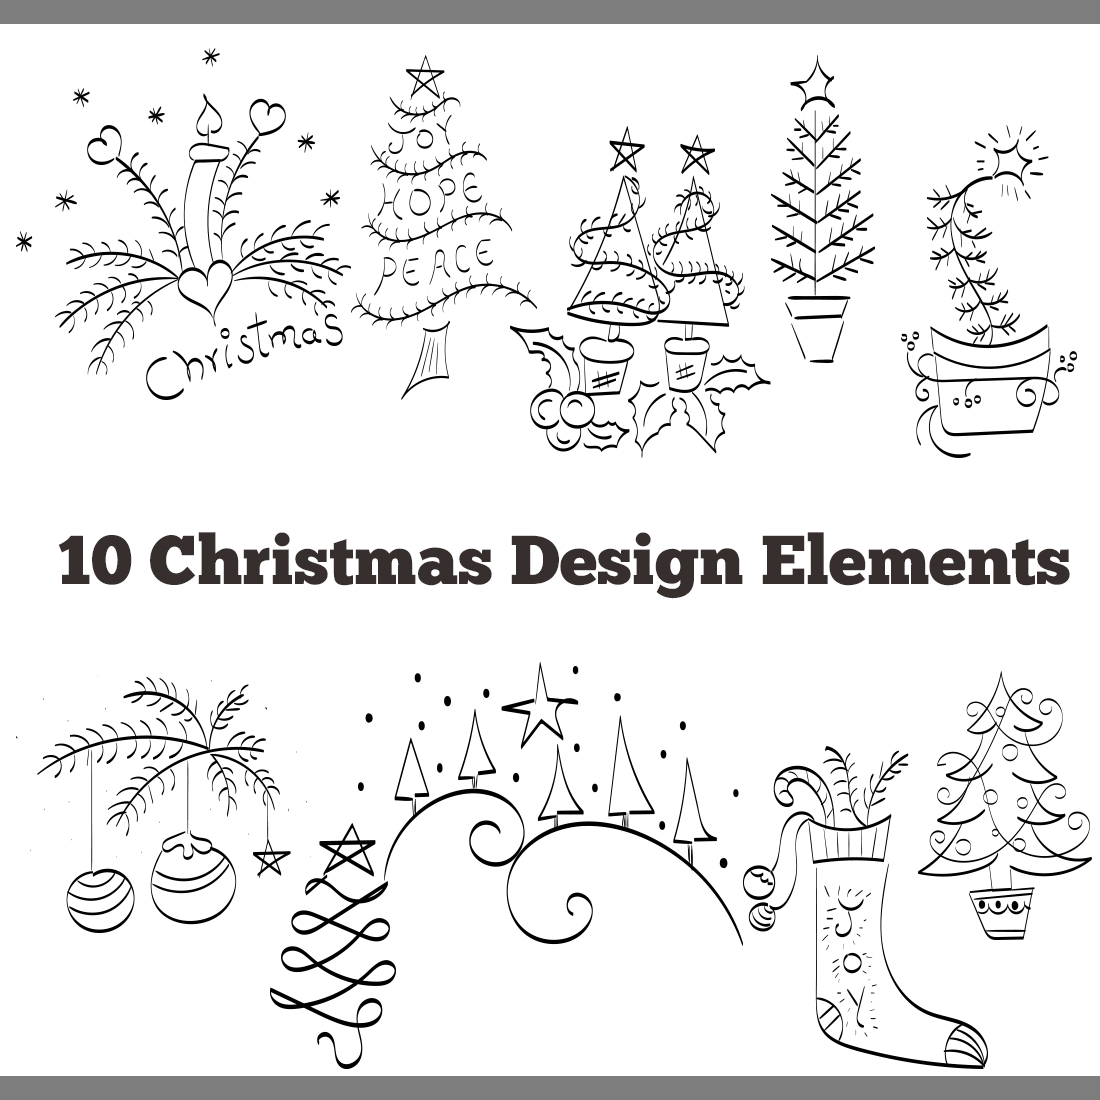 10 Christmas Design Elements created by dorothyart.